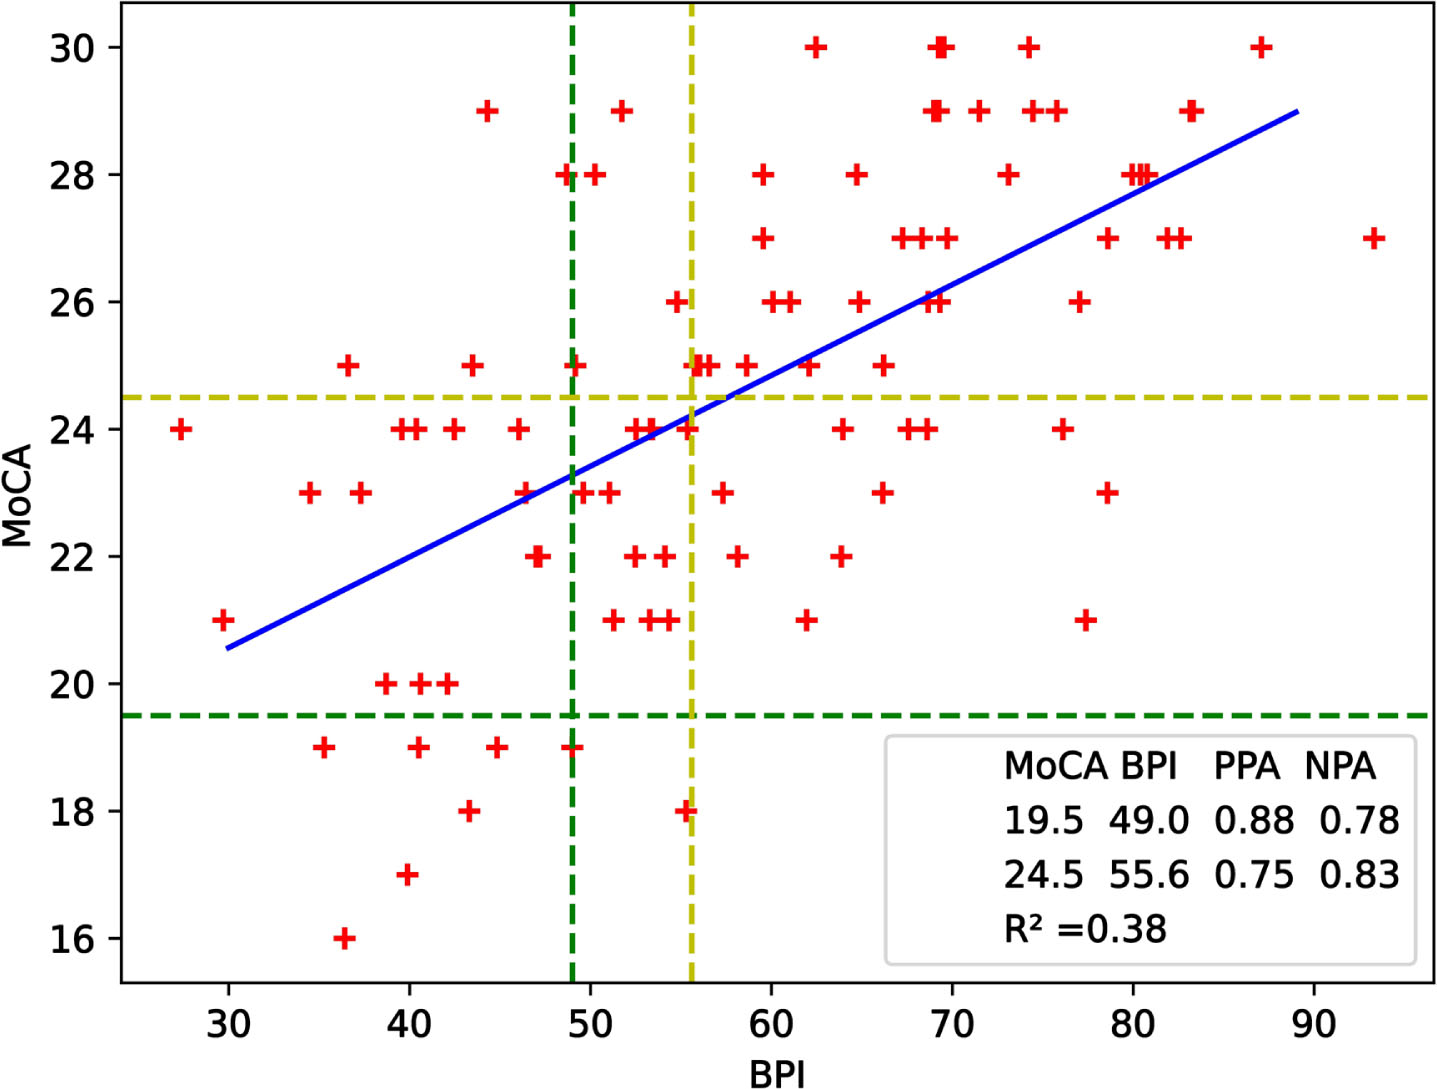 Scatterplot of MoCA and BPI scores of participants for cut-off score determination study. The blue linear regression line, represented by the equation y = (0.14±0.02)×BPI + (16.29±1.17), has an R∧2 of 0.38. Green lines correspond to lower cut-offs of the tests whereas yellow ones represent upper cut-offs. NPA = 0.78 and PPA = 0.88 for the lower cut-offs while NPA = 0.83 and PPA = 0.75 for the upper cut-offs.